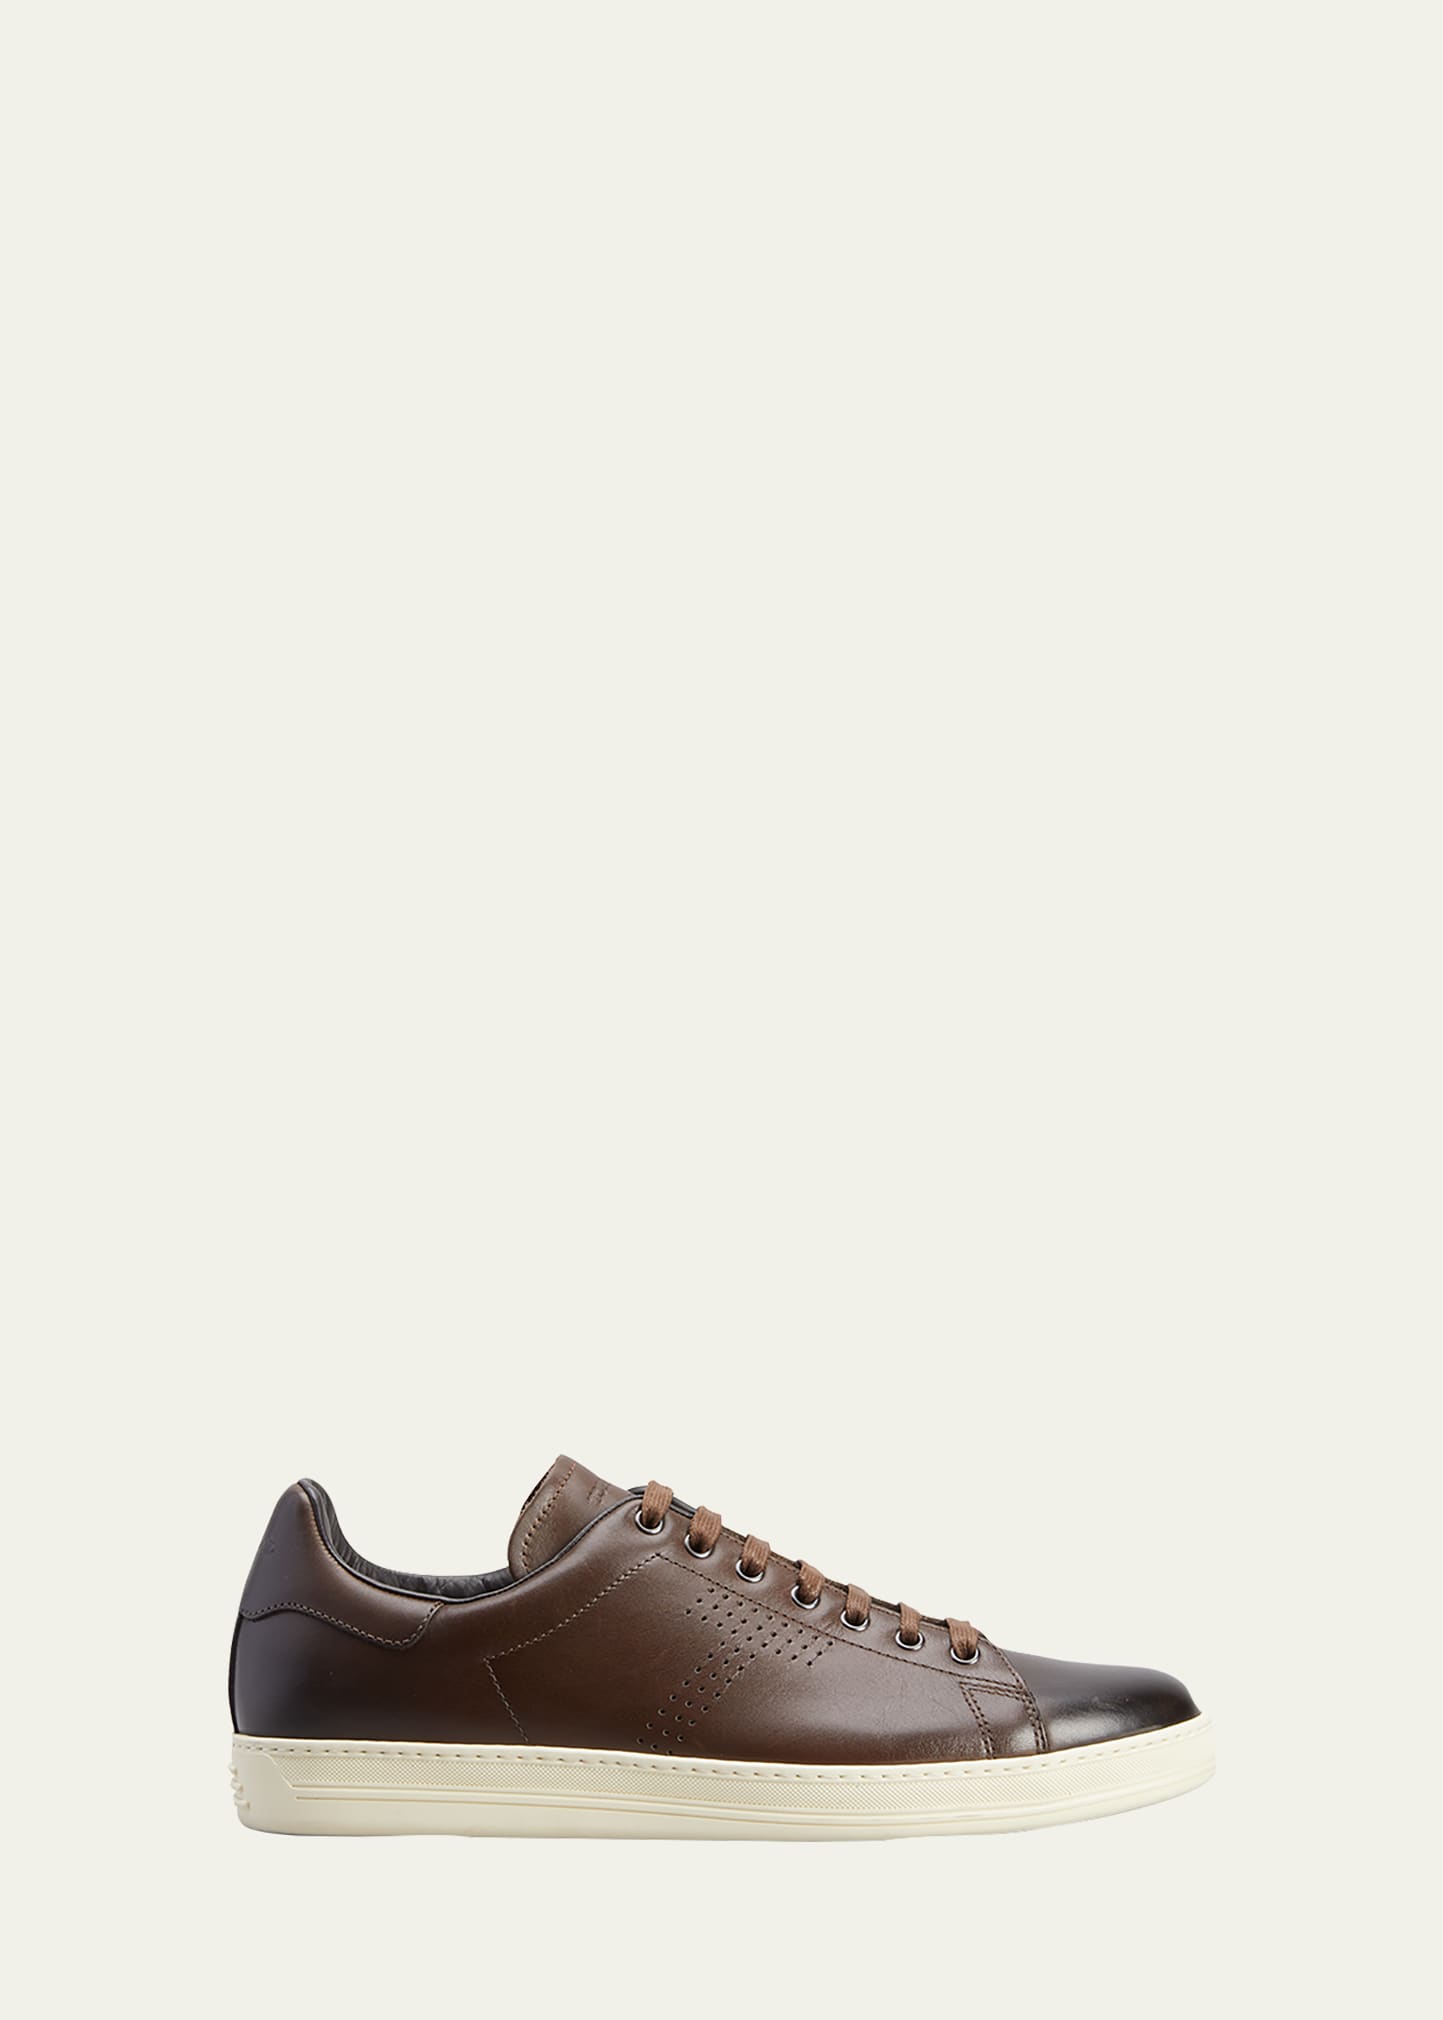 Tom Ford Men's Warwick Burnished Leather Low-top Sneakers In Brown Cr